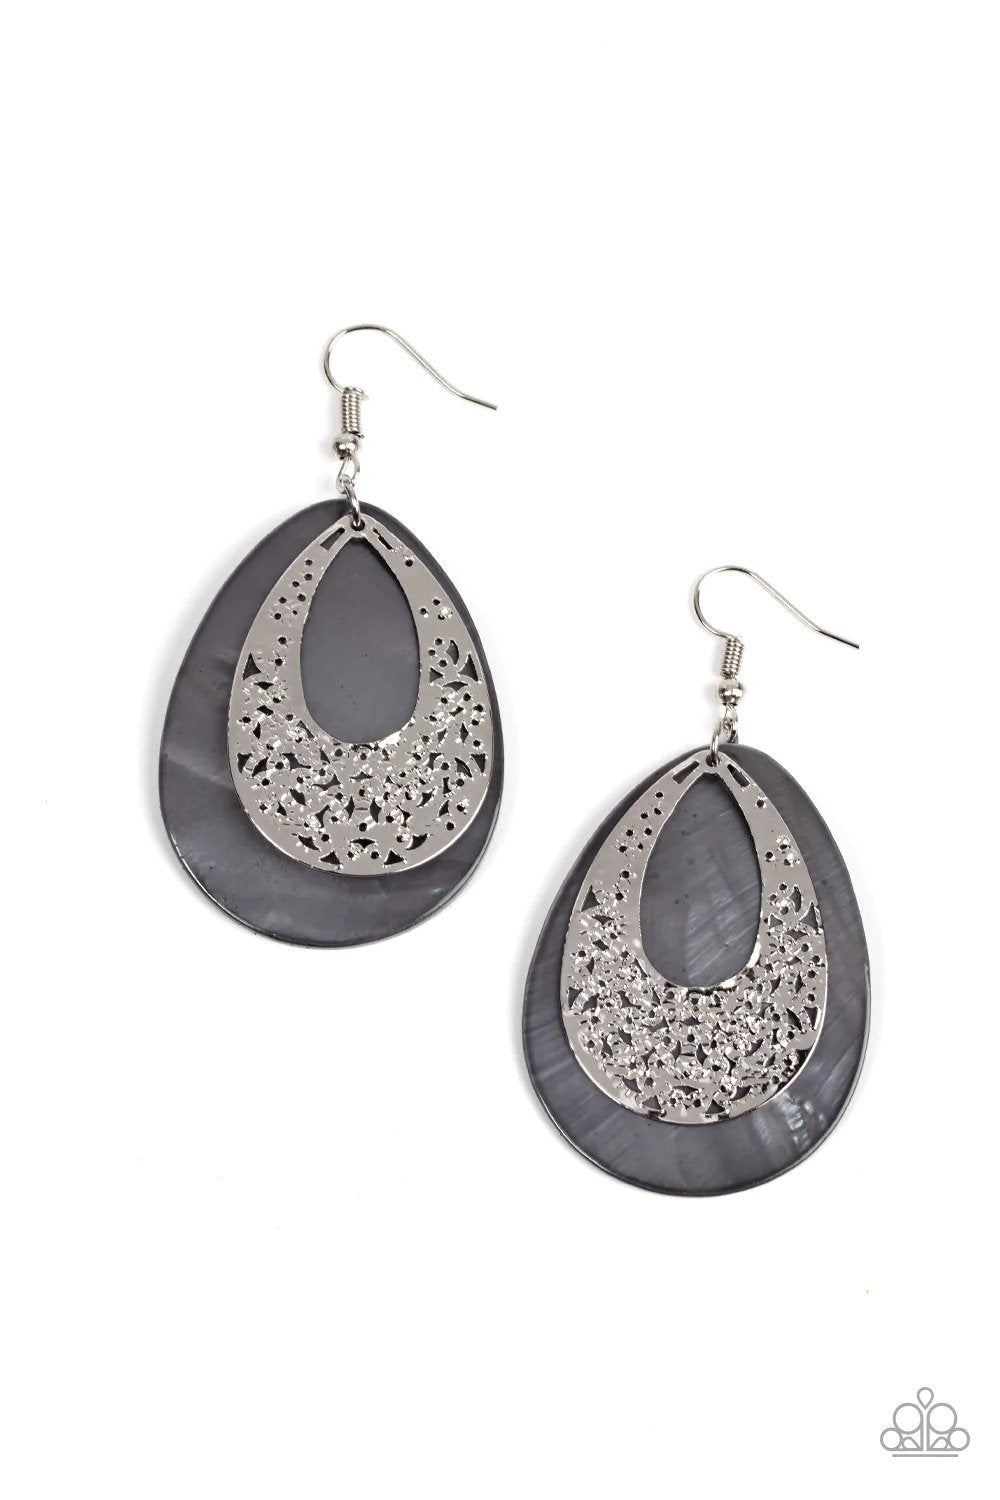 Bountiful Beaches Silver Earrings - Paparazzi Accessories- lightbox - CarasShop.com - $5 Jewelry by Cara Jewels